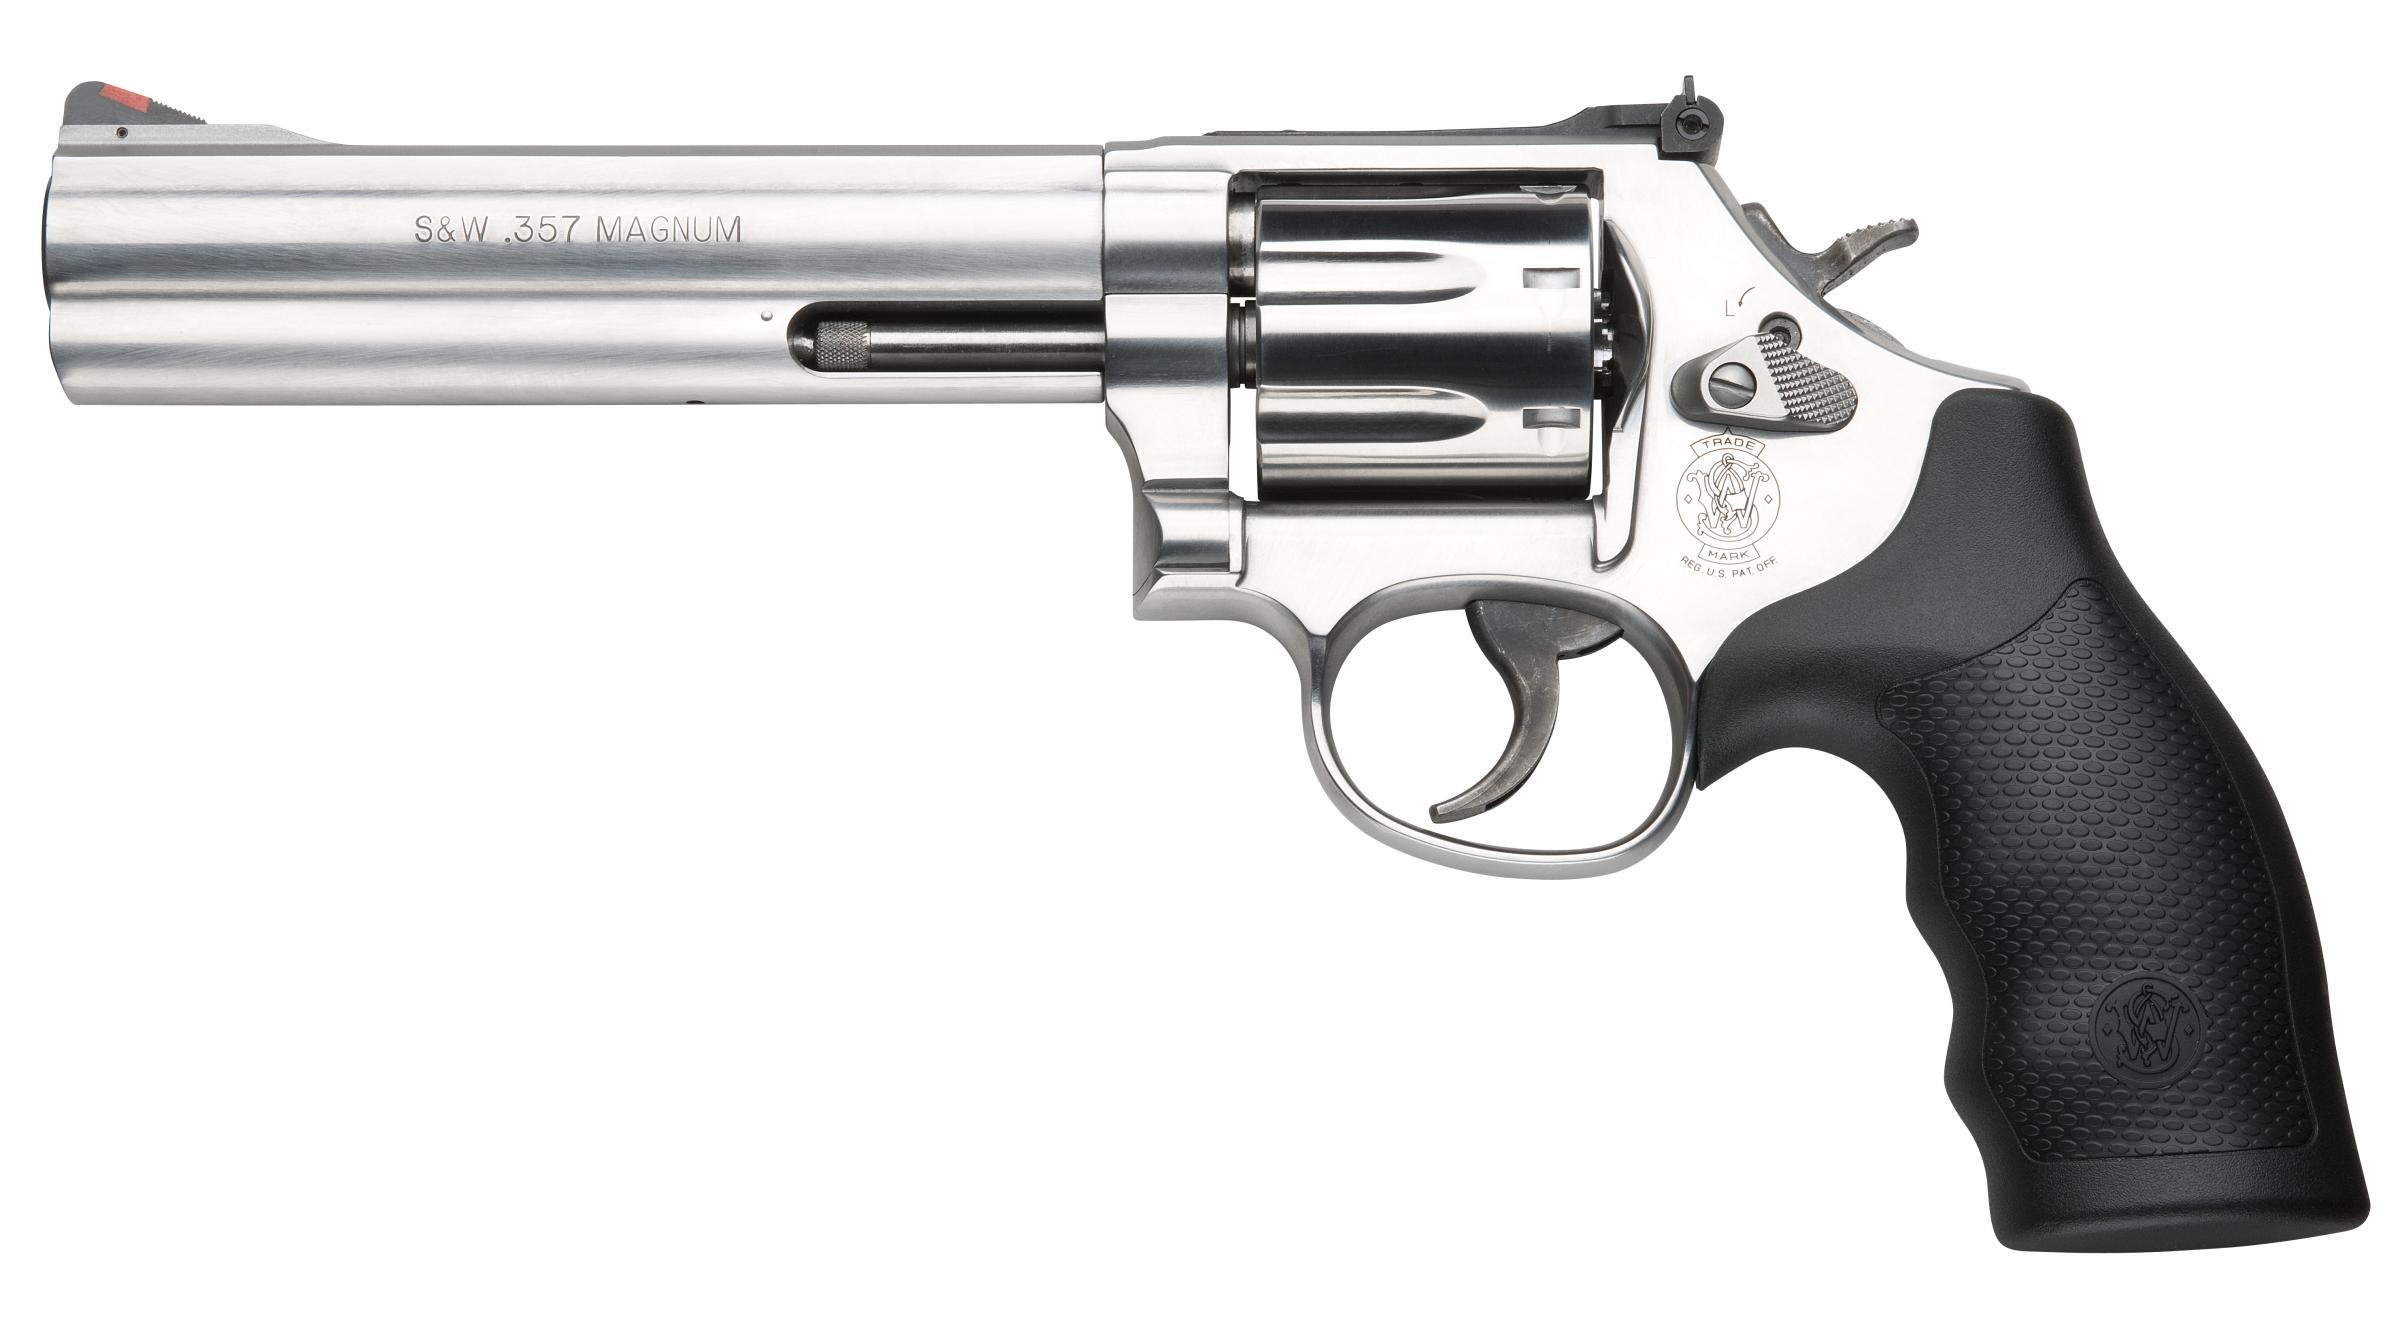 Smith & Wesson Model 686 Plus .357 Magnum, .38 S&W SPECIAL +P 164198